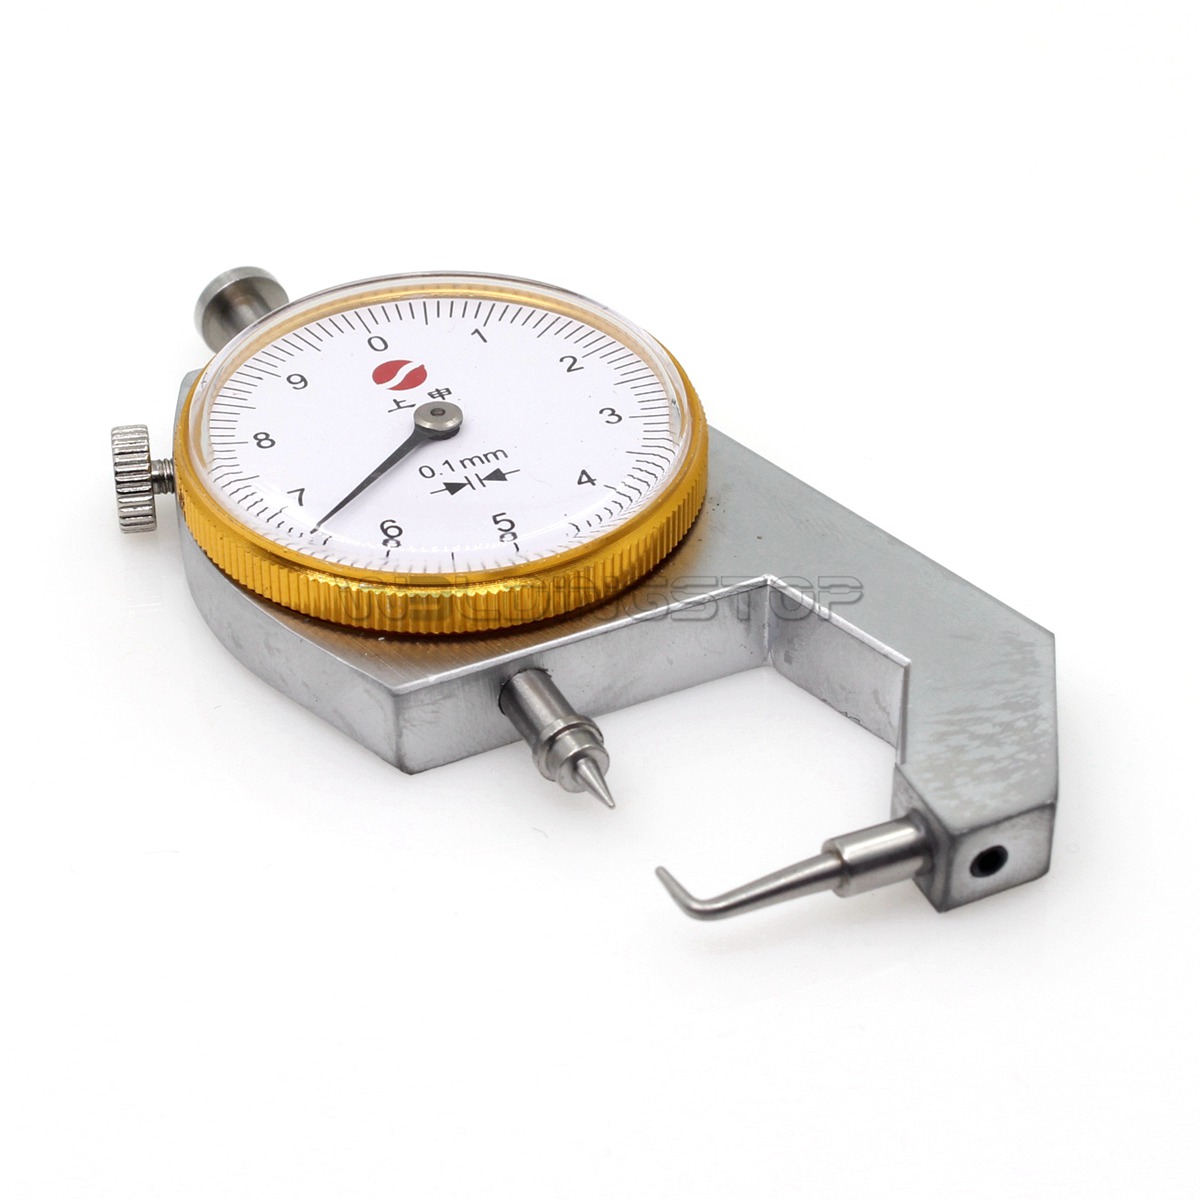 Details about   Thickness Gauge,0-10mmx0.1mm Range Round Dial Indicator Thickness Gauge 